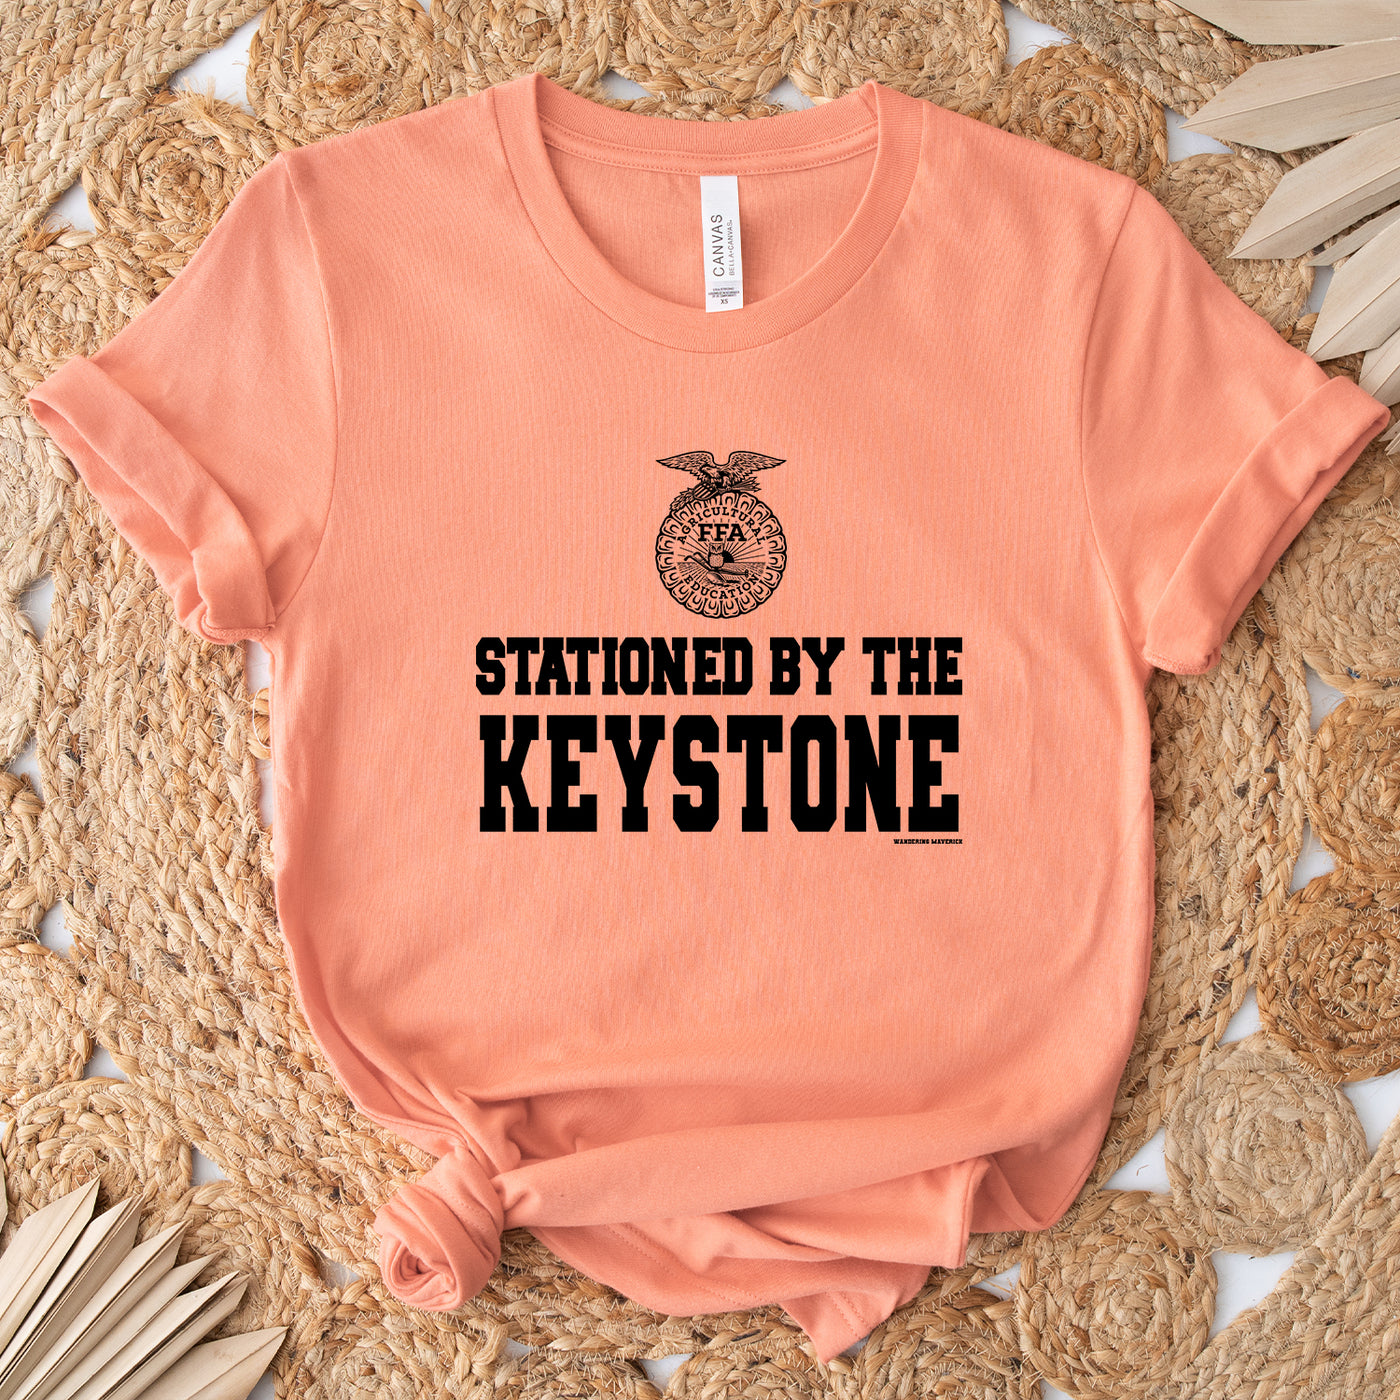 Stationed by the keystone ffa T-Shirt (XS-4XL) - Multiple Colors!